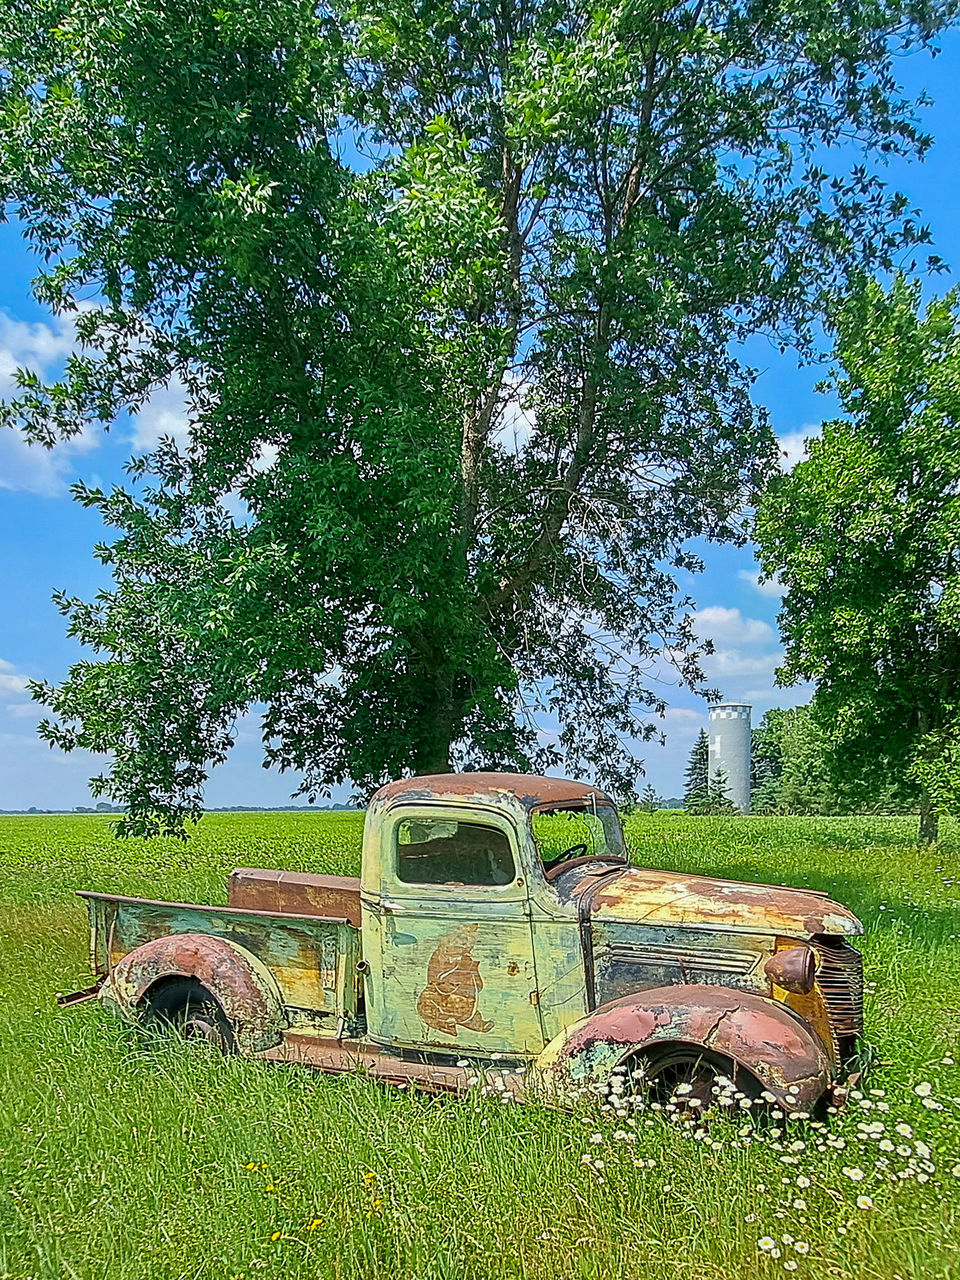 plant, tree, mode of transportation, transportation, green, land vehicle, nature, grass, field, day, land, vehicle, sky, motor vehicle, rural area, growth, no people, landscape, abandoned, lawn, car, rural scene, old, agriculture, meadow, agricultural machinery, agricultural equipment, outdoors, farm, tractor, damaged, rusty, off-roading, sunlight, history, truck, pasture